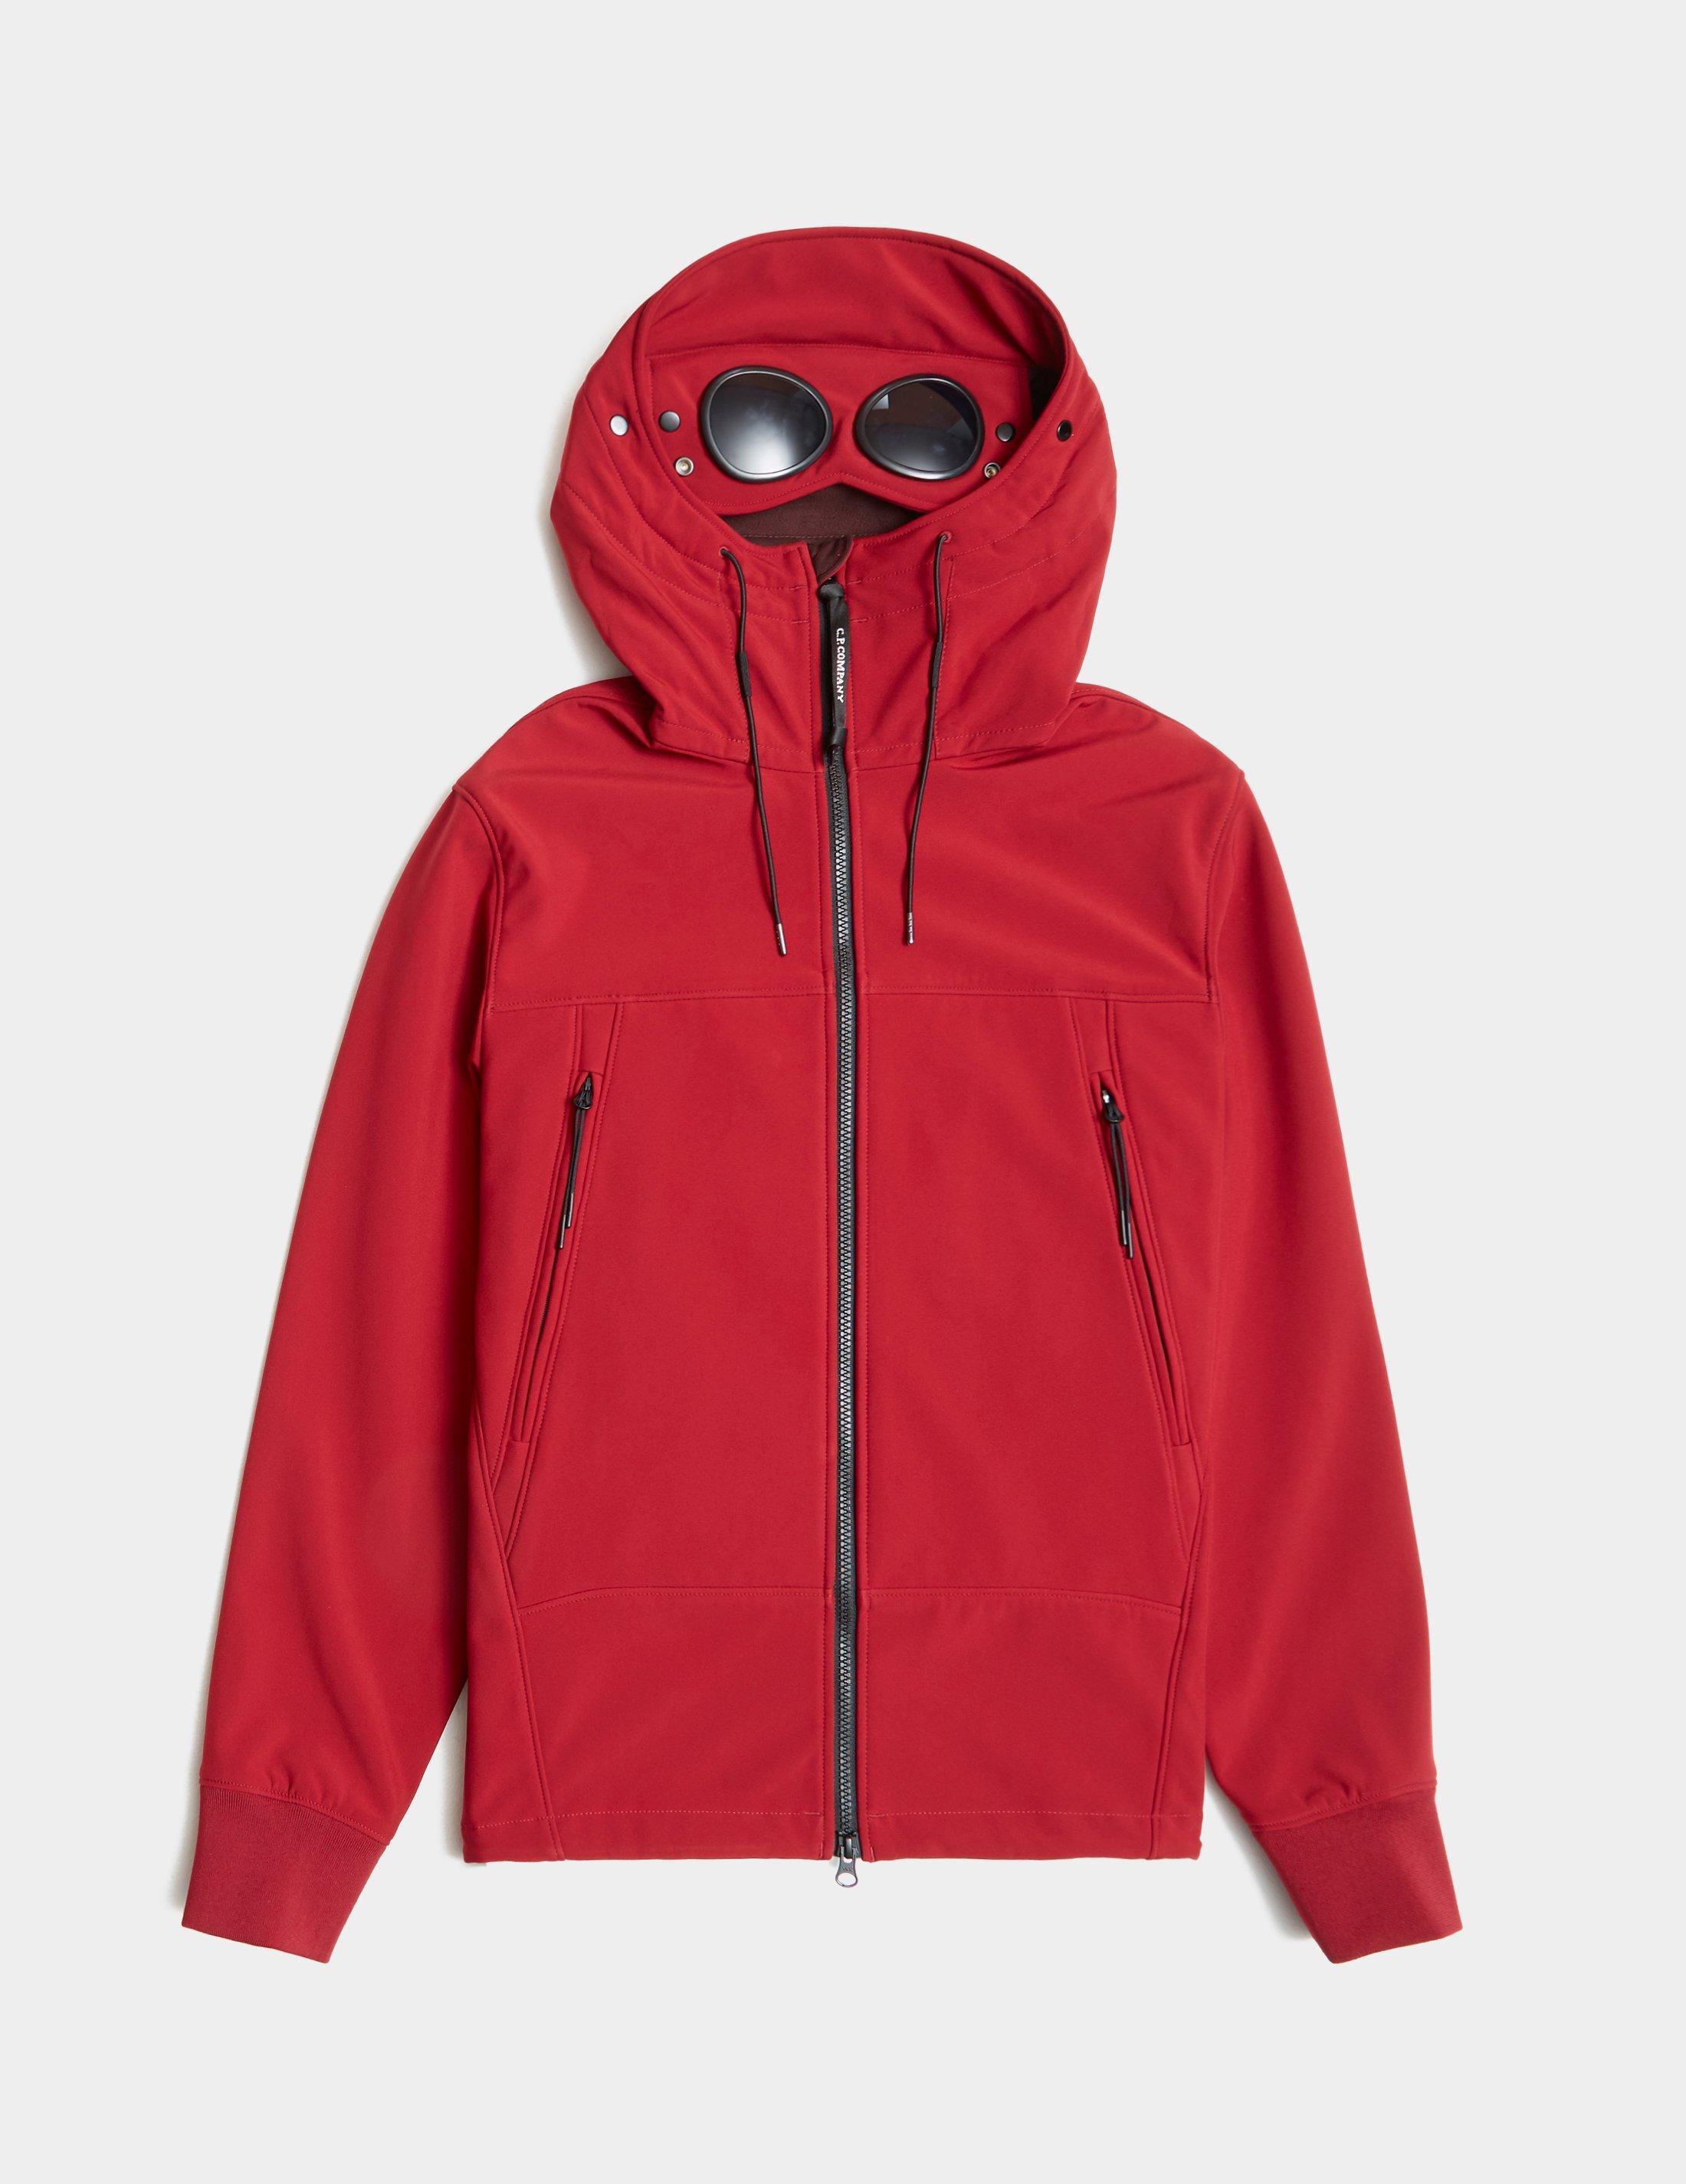 C.P. Company Goggle Softshell Jacket Red for Men - Lyst